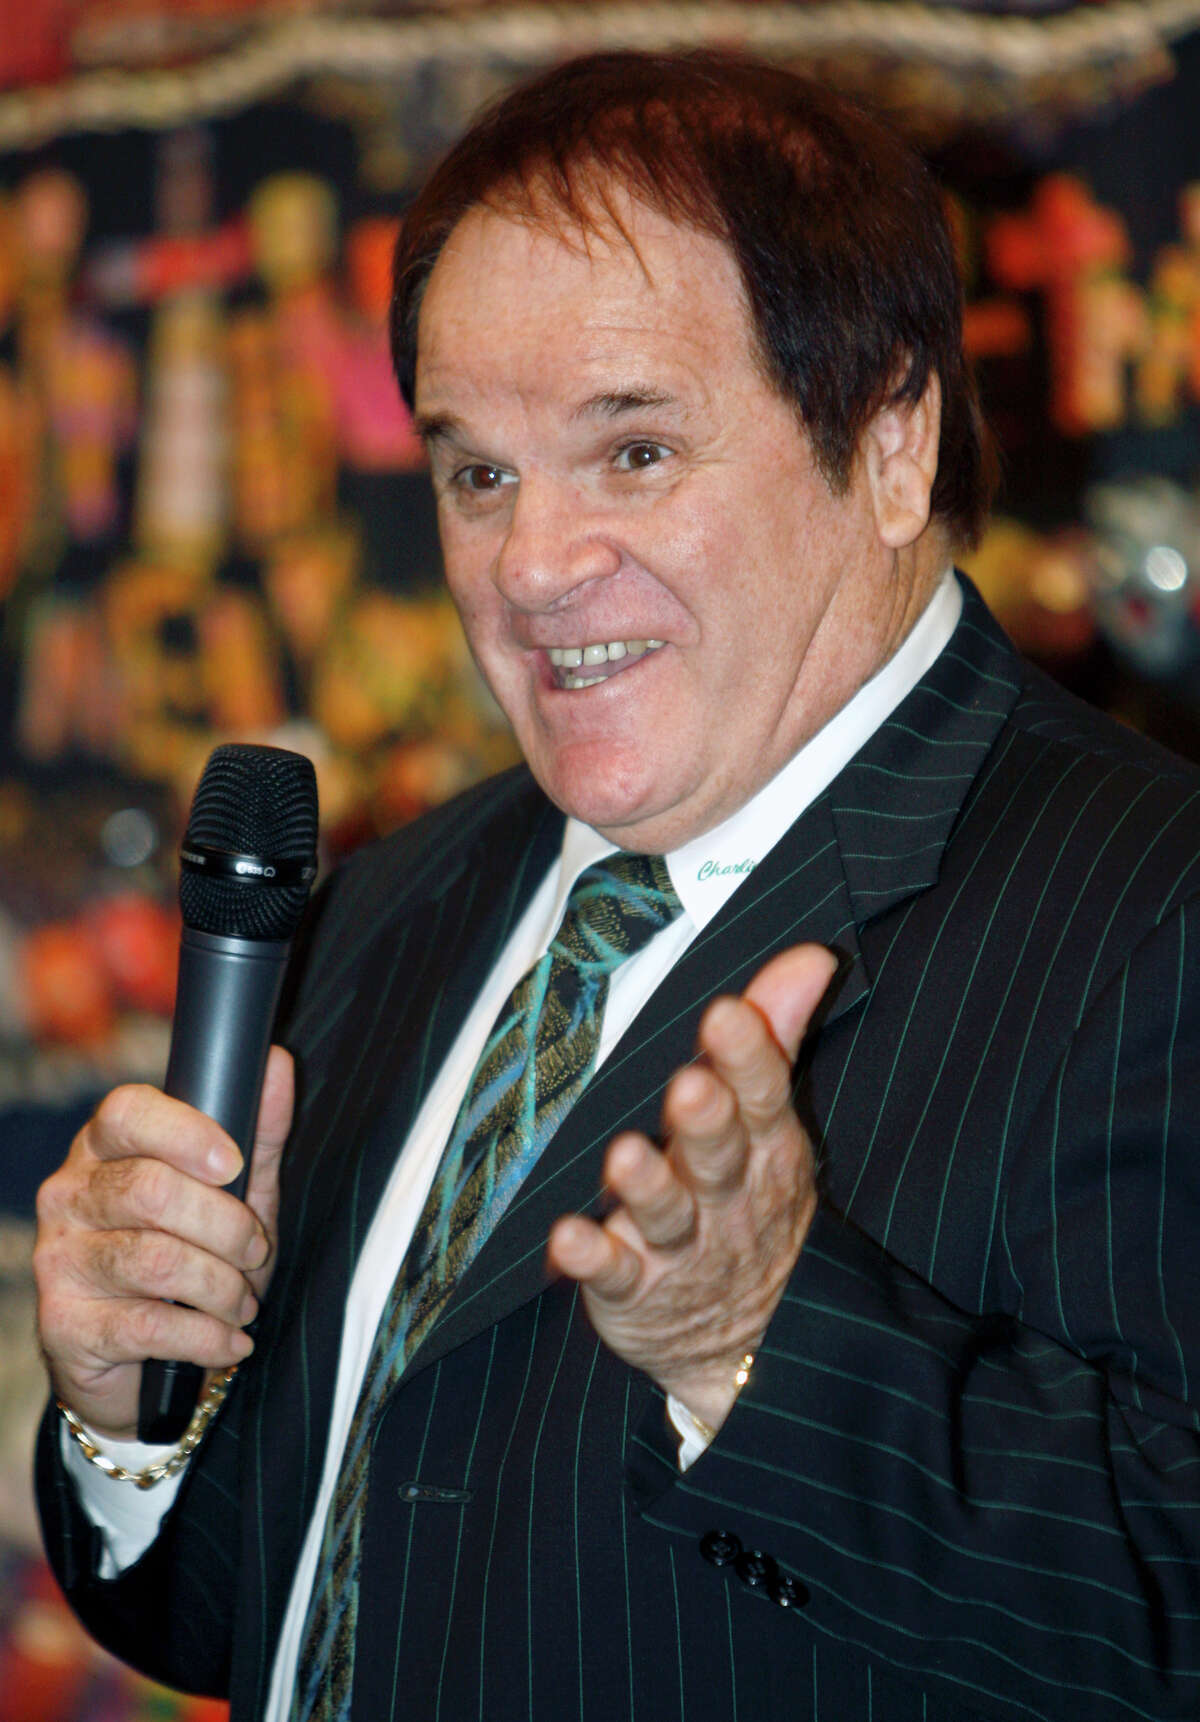 FILE - This May 14, 2011 file photo shows former Major League Baseball great Pete Rose speaking at the Ohio Justice & Policy Center's inaugural gala at the National Underground Railroad Freedom Center, in Cincinnati. Rose is taking a swing at his own reality TV show. Cable's TLC network says it has started production on an unscripted series to chronicle the lives of baseball's all-time hitting leader and his fiancee, model Kiana Kim. (AP Photo/David Kohl, File)